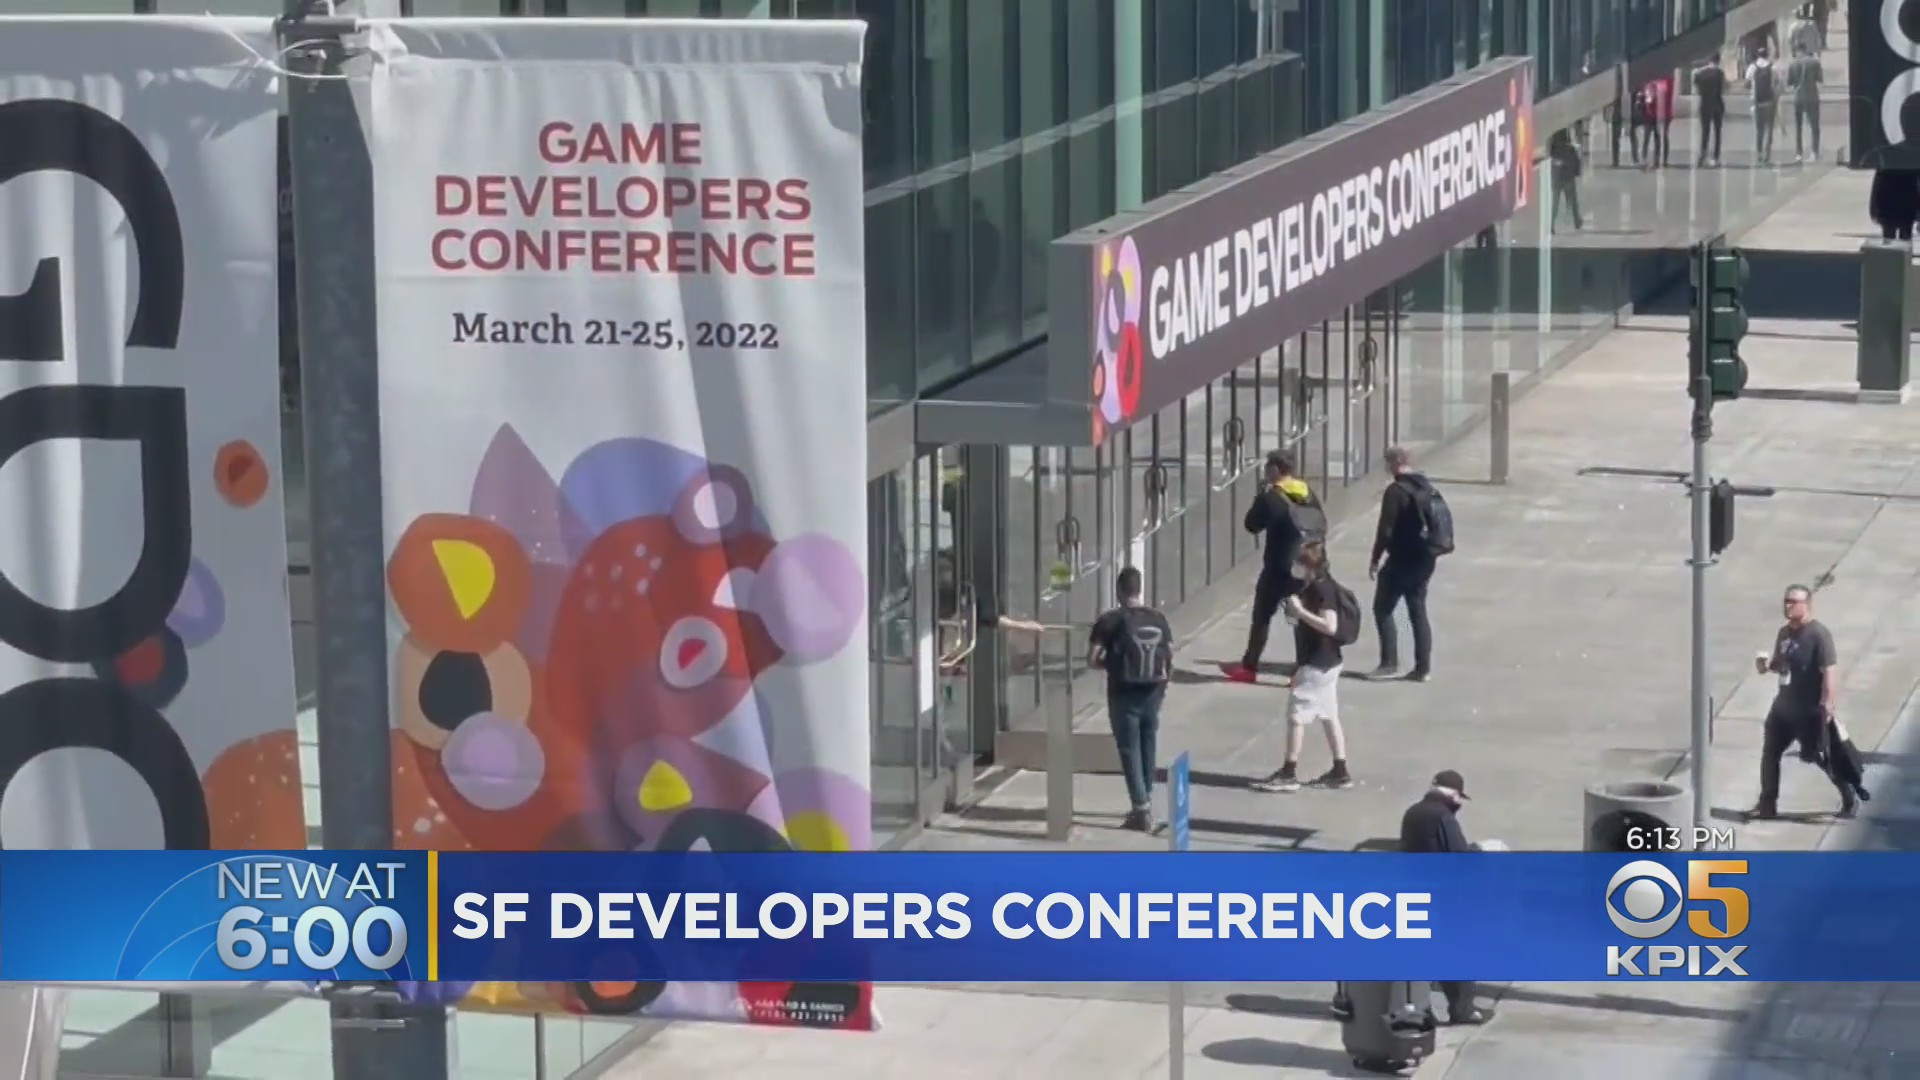 Thousands Of Gamers Pack SF’s Moscone Center For 2022 Game Developers Conference